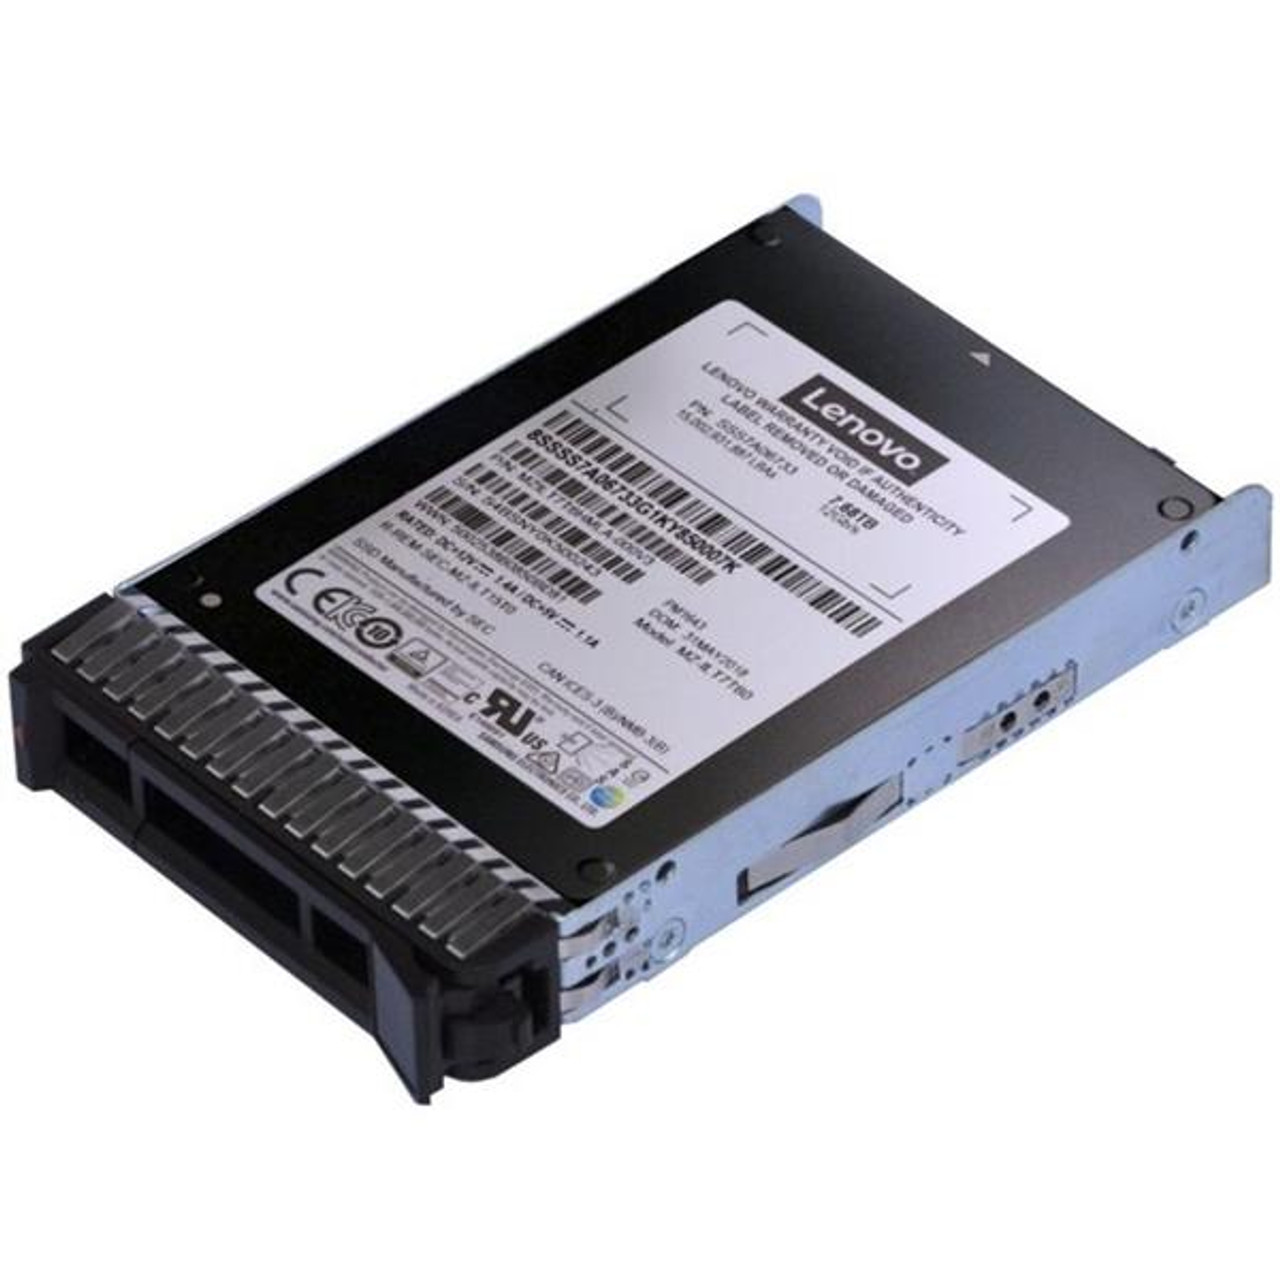 01GV622 Lenovo 3.84TB SAS 12Gbps Read Intensive Hot-Swap 2.5-inch Internal Solid State Drive (SSD)